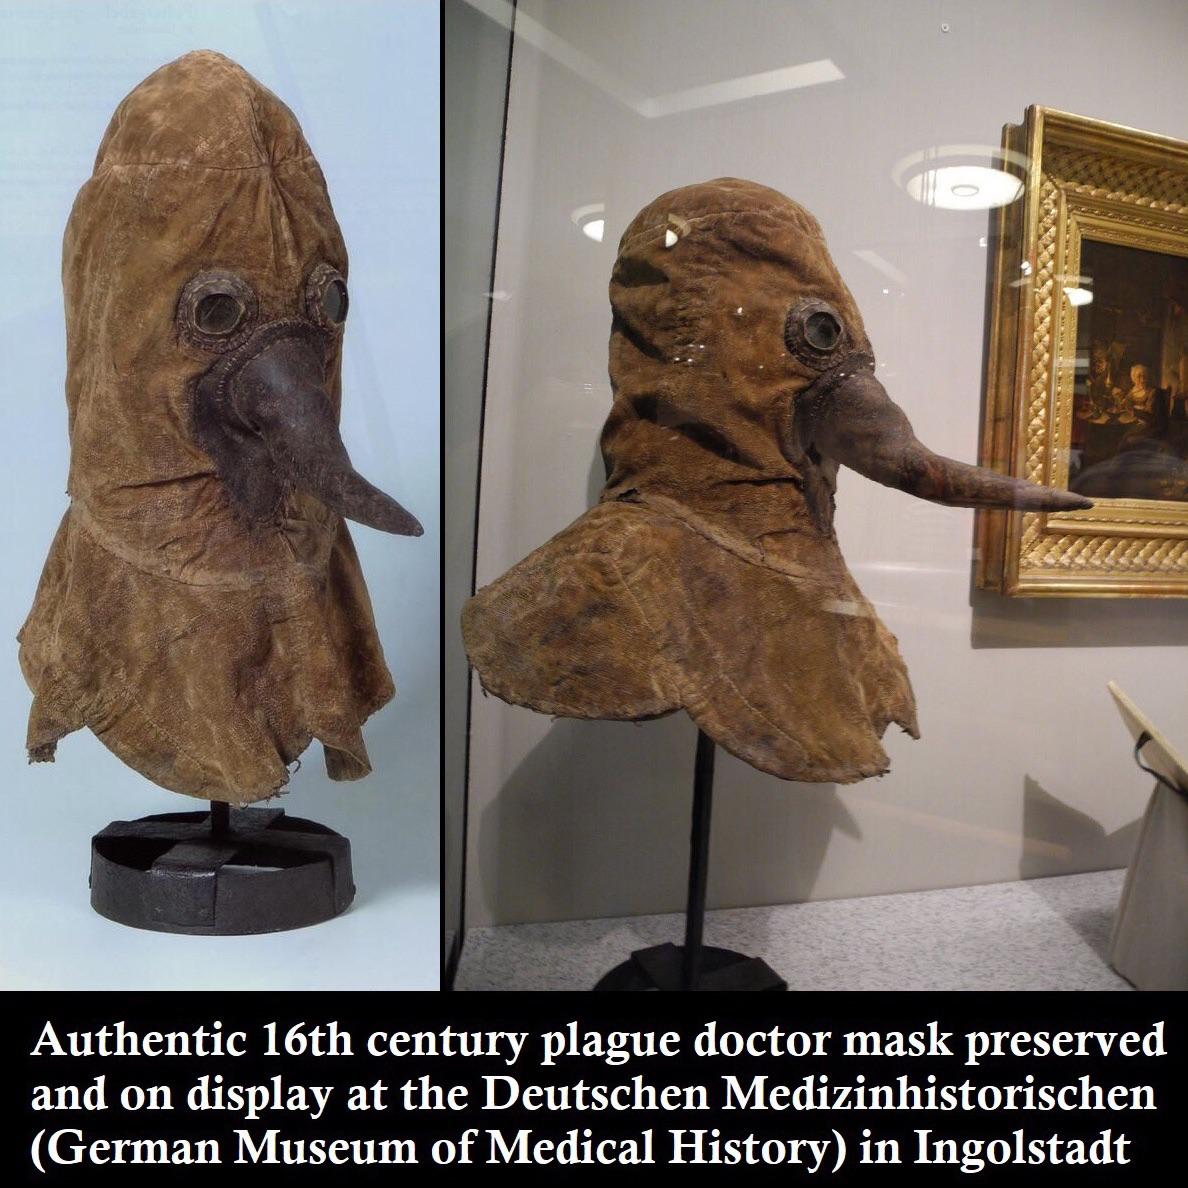 was the plague doctor real